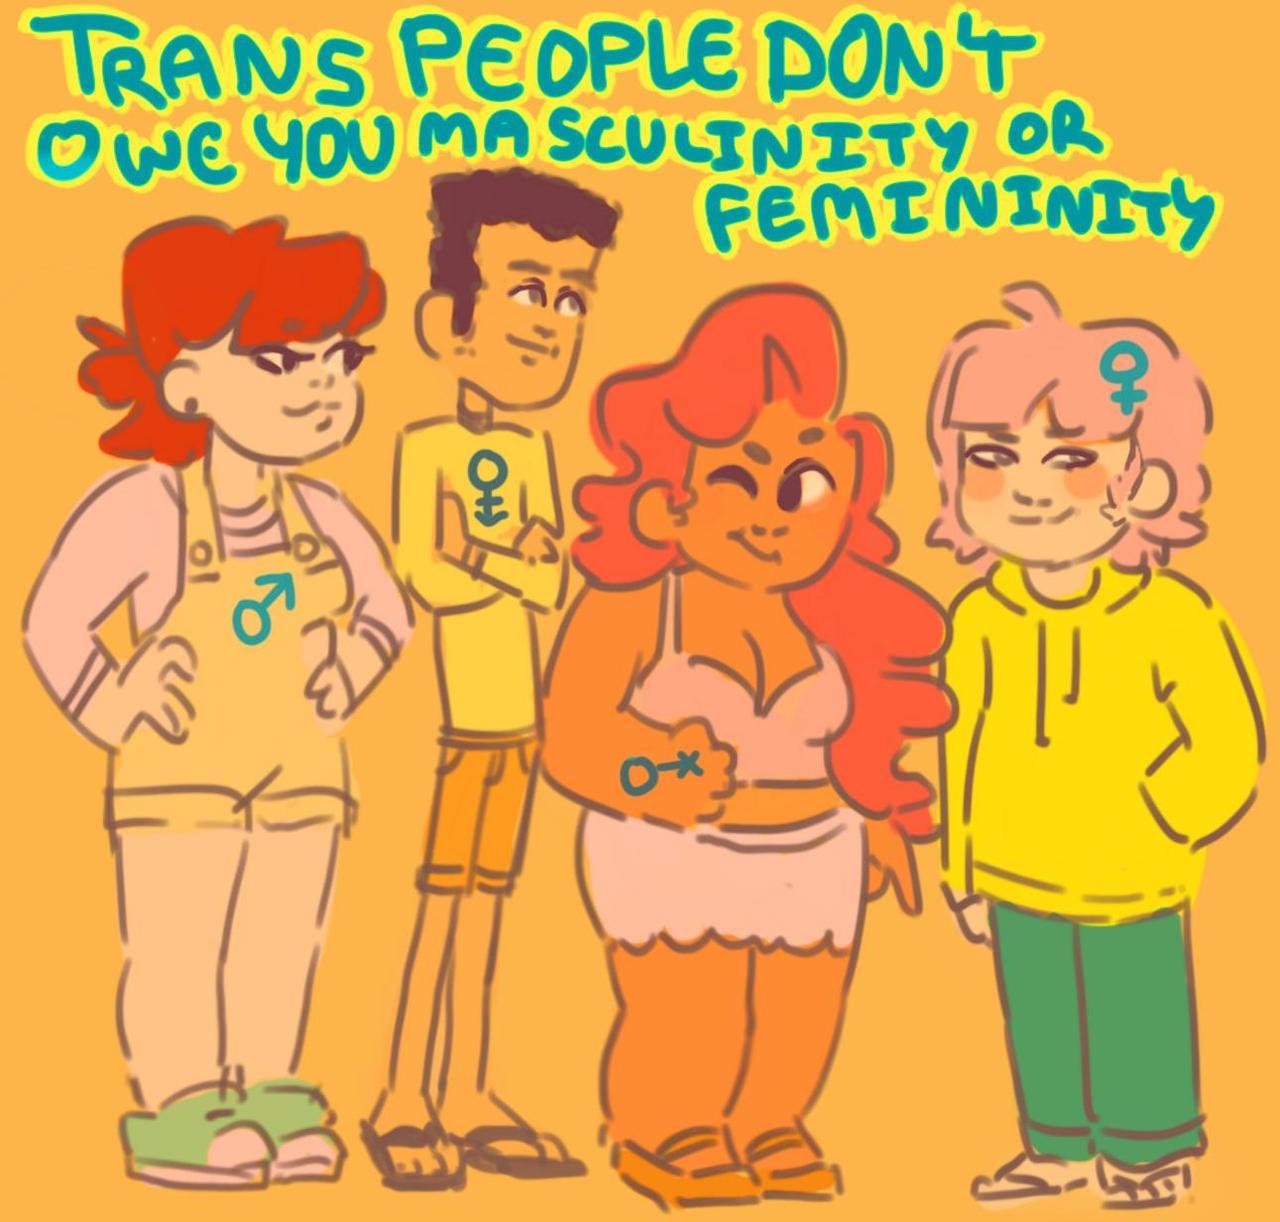 Trans people don?t owe you masculinity or femininity.